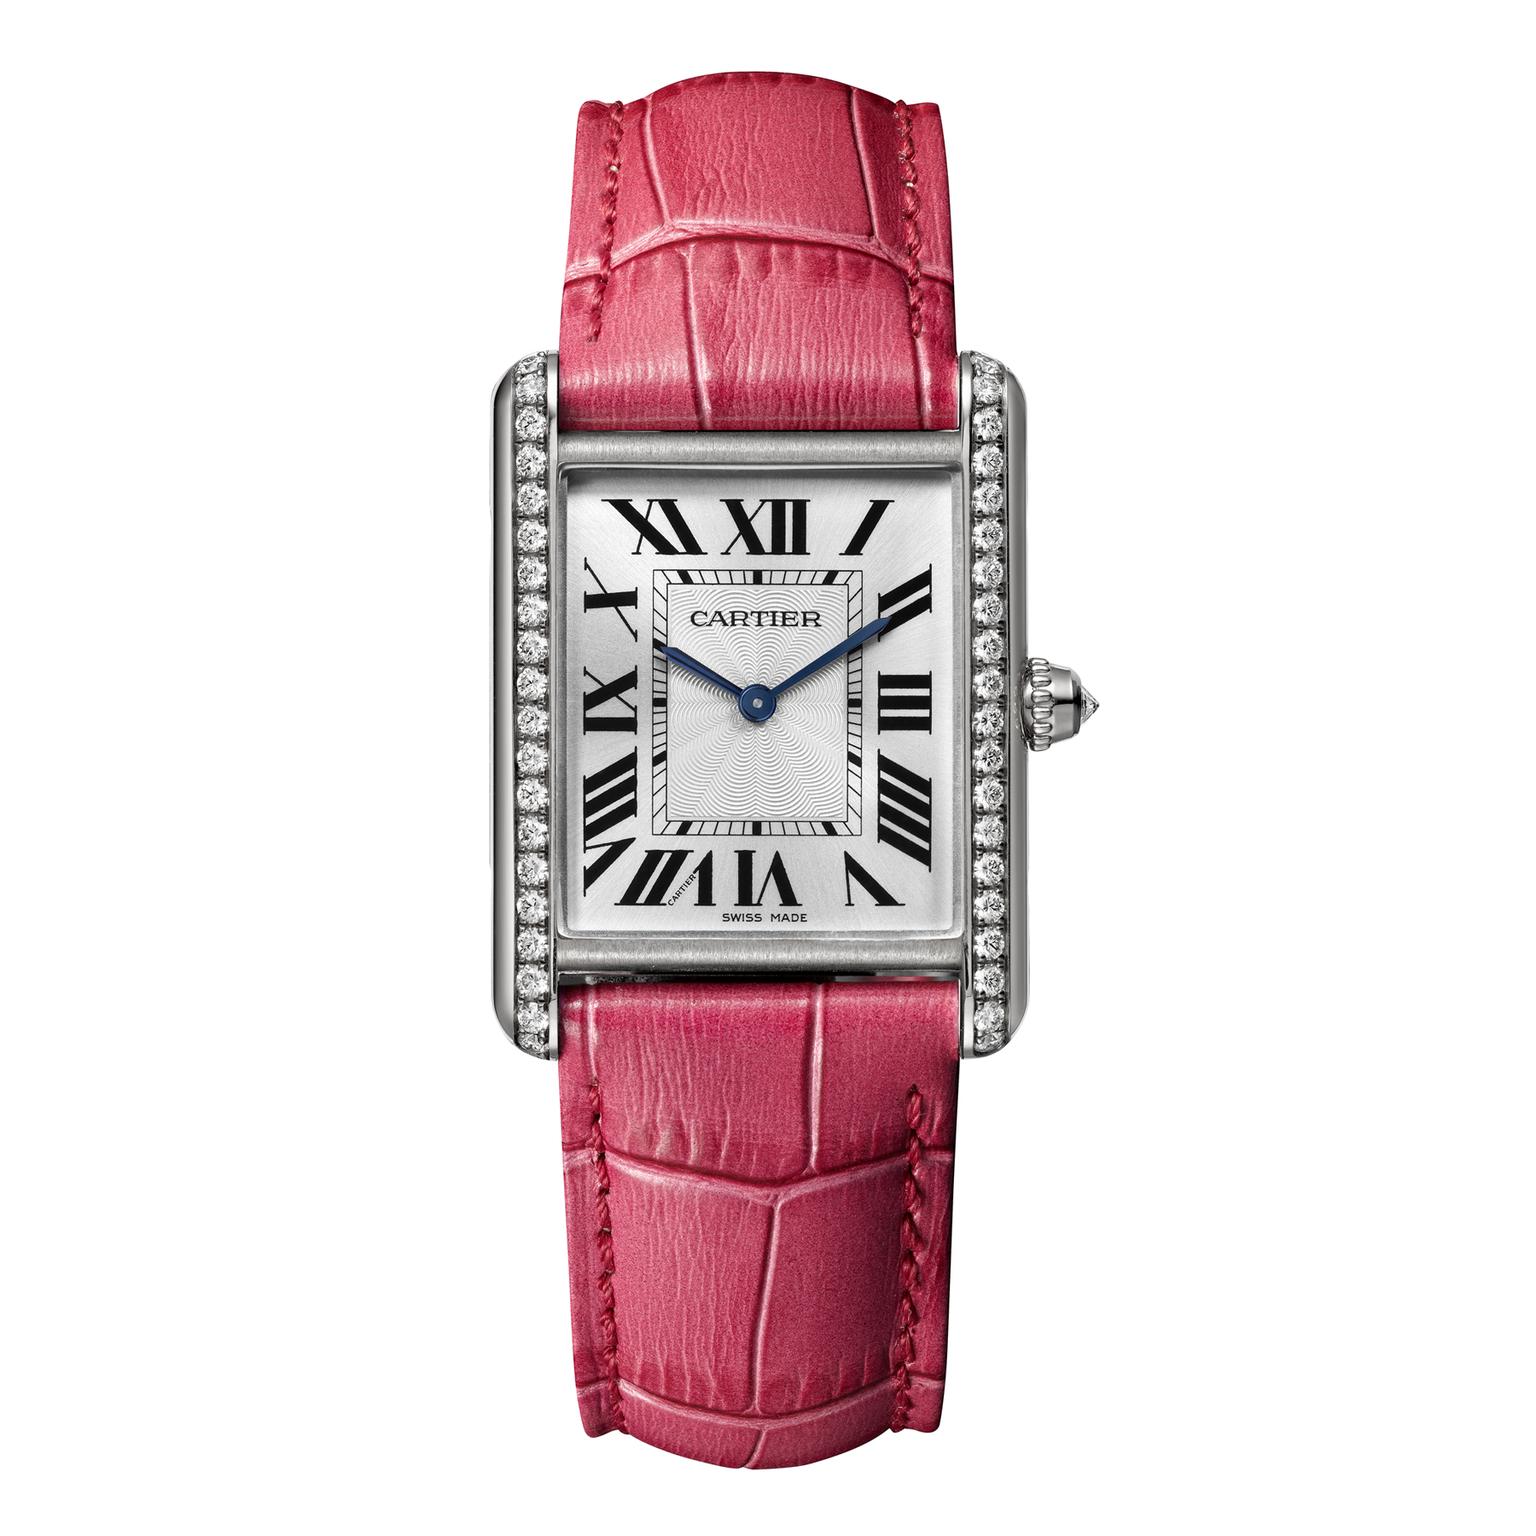 Cartier Tank Louis Cartier large white gold watch with diamonds